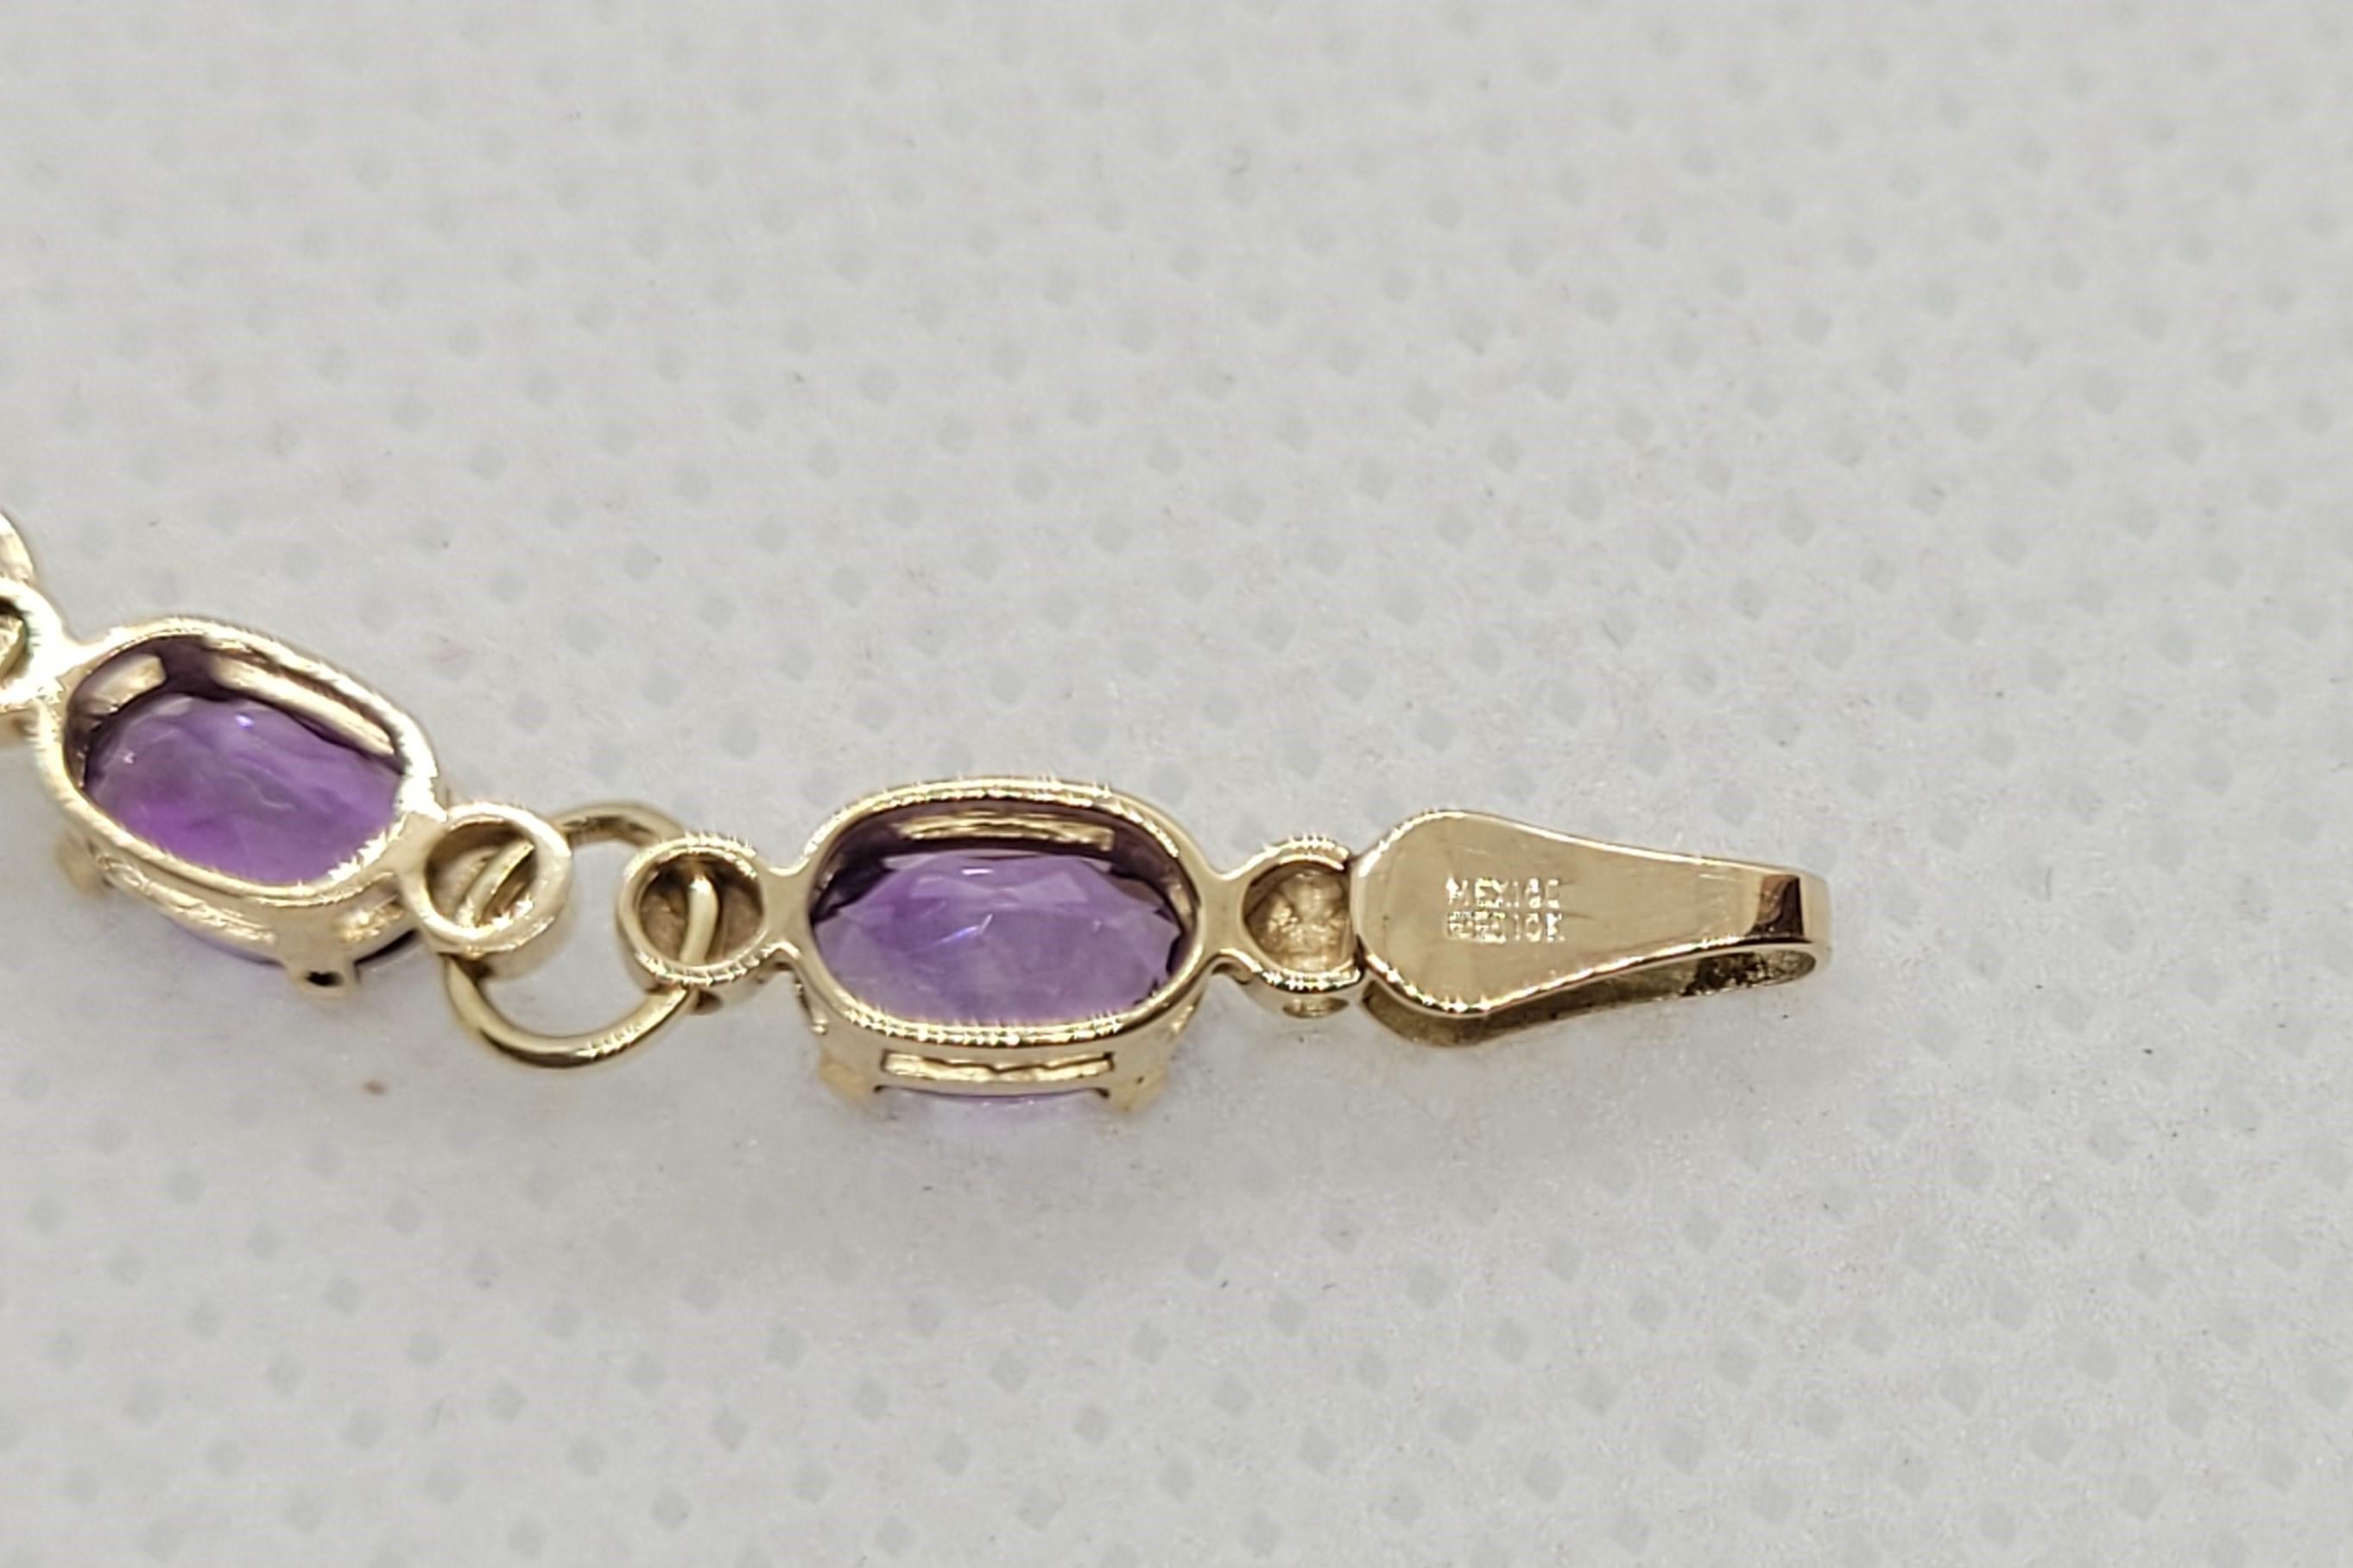 Women's Yellow Gold Amethyst Bracelet, 6 x 4 mm Oval Amethyst, 10kt Gold, 7.25 Inches For Sale